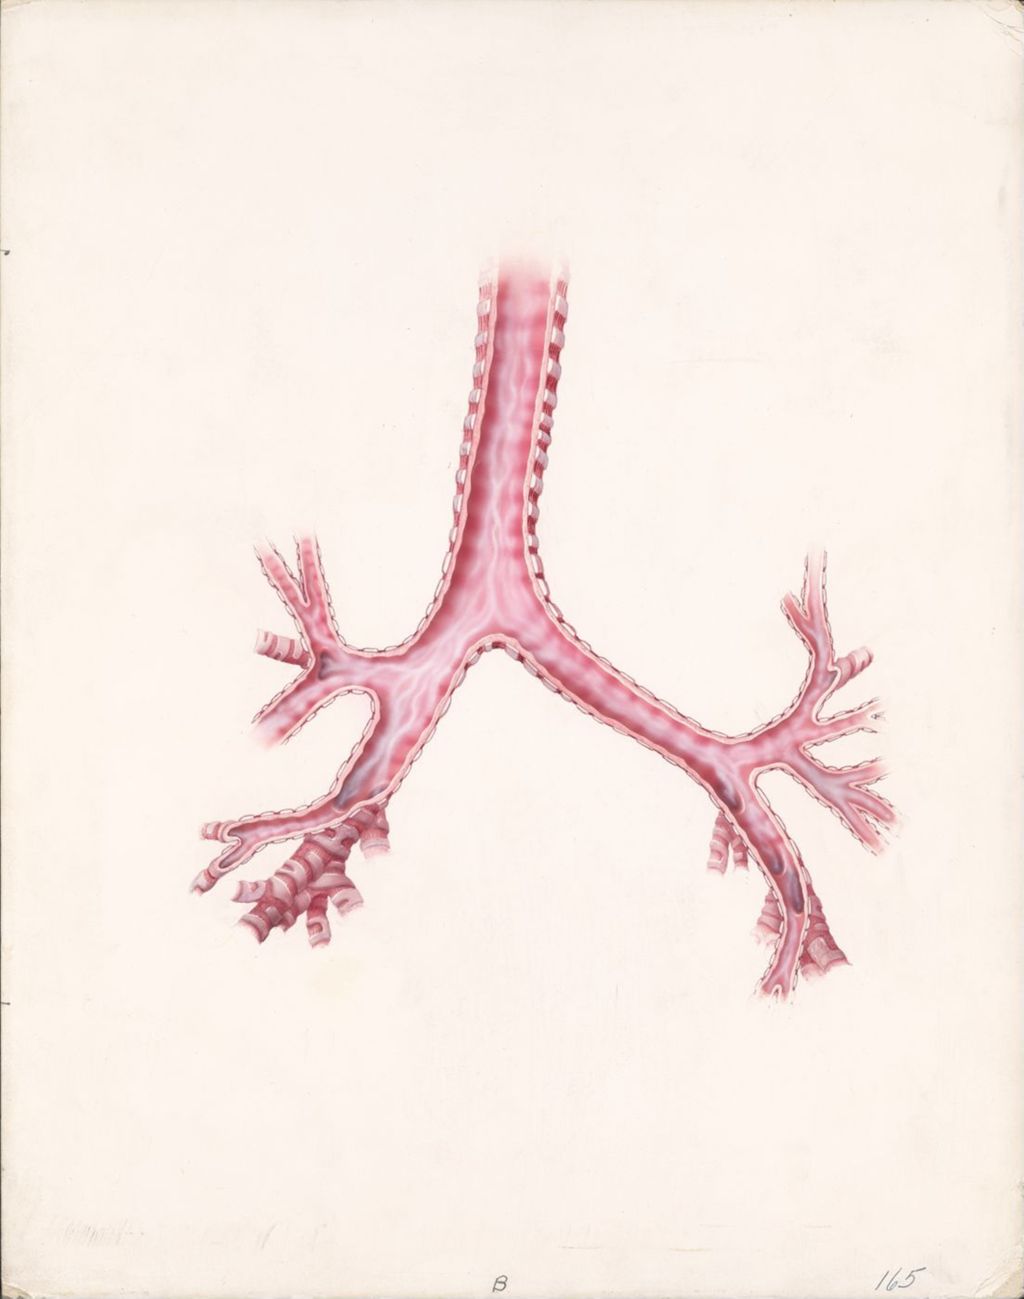 Miniature of Lung structure